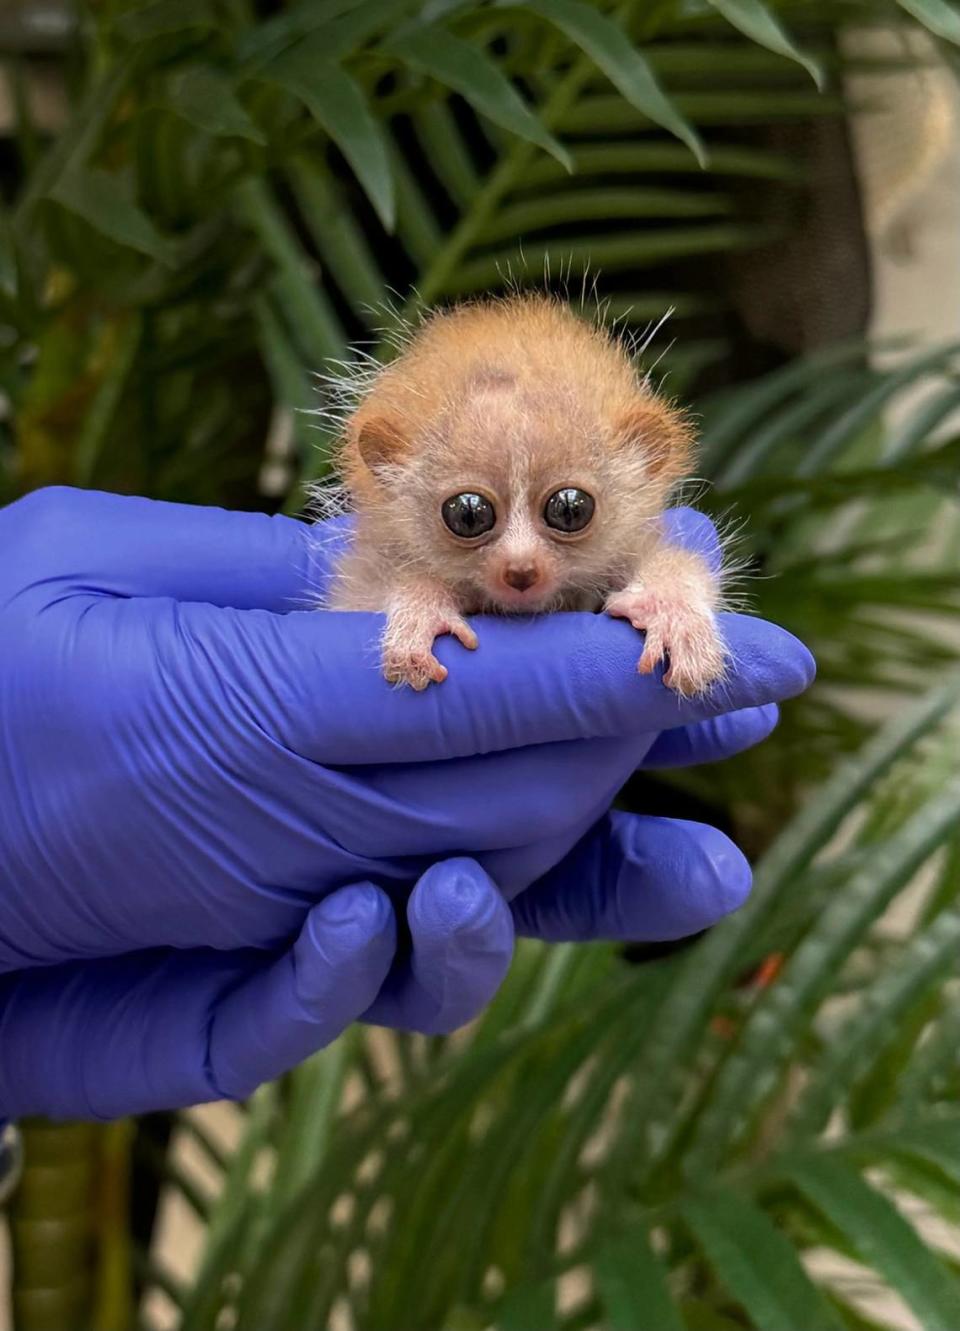 Two pygmy slow loris babies were born Smithsonian’s National Zoo and Conservation Biology Institute on March 21.